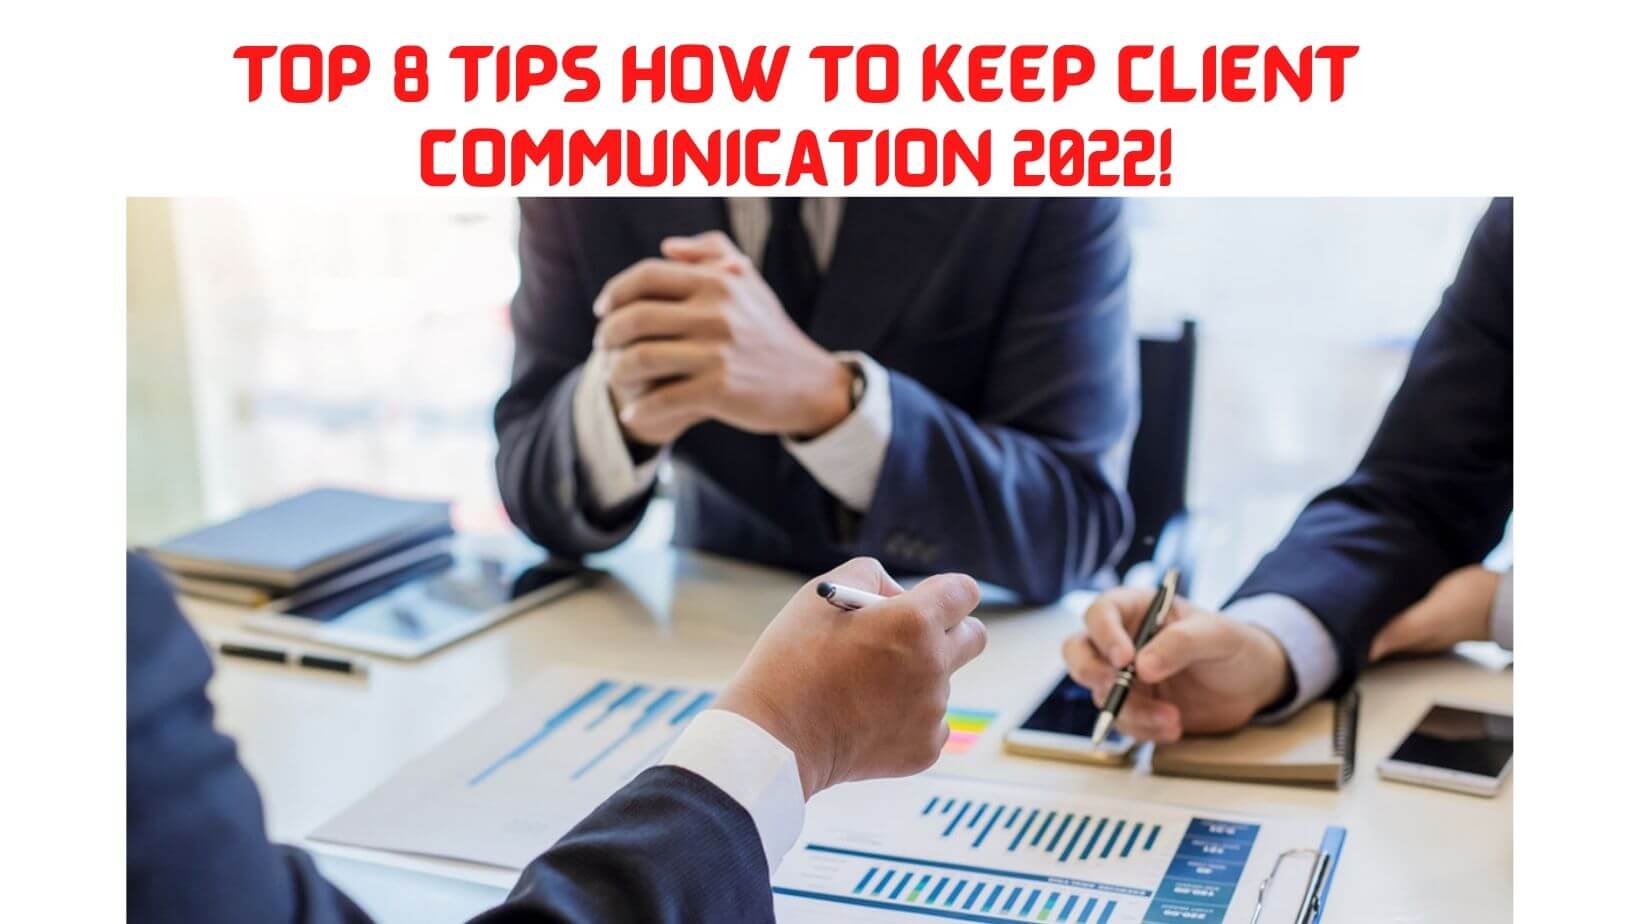 Top 8 Tips How To Keep Client Communication 2022!